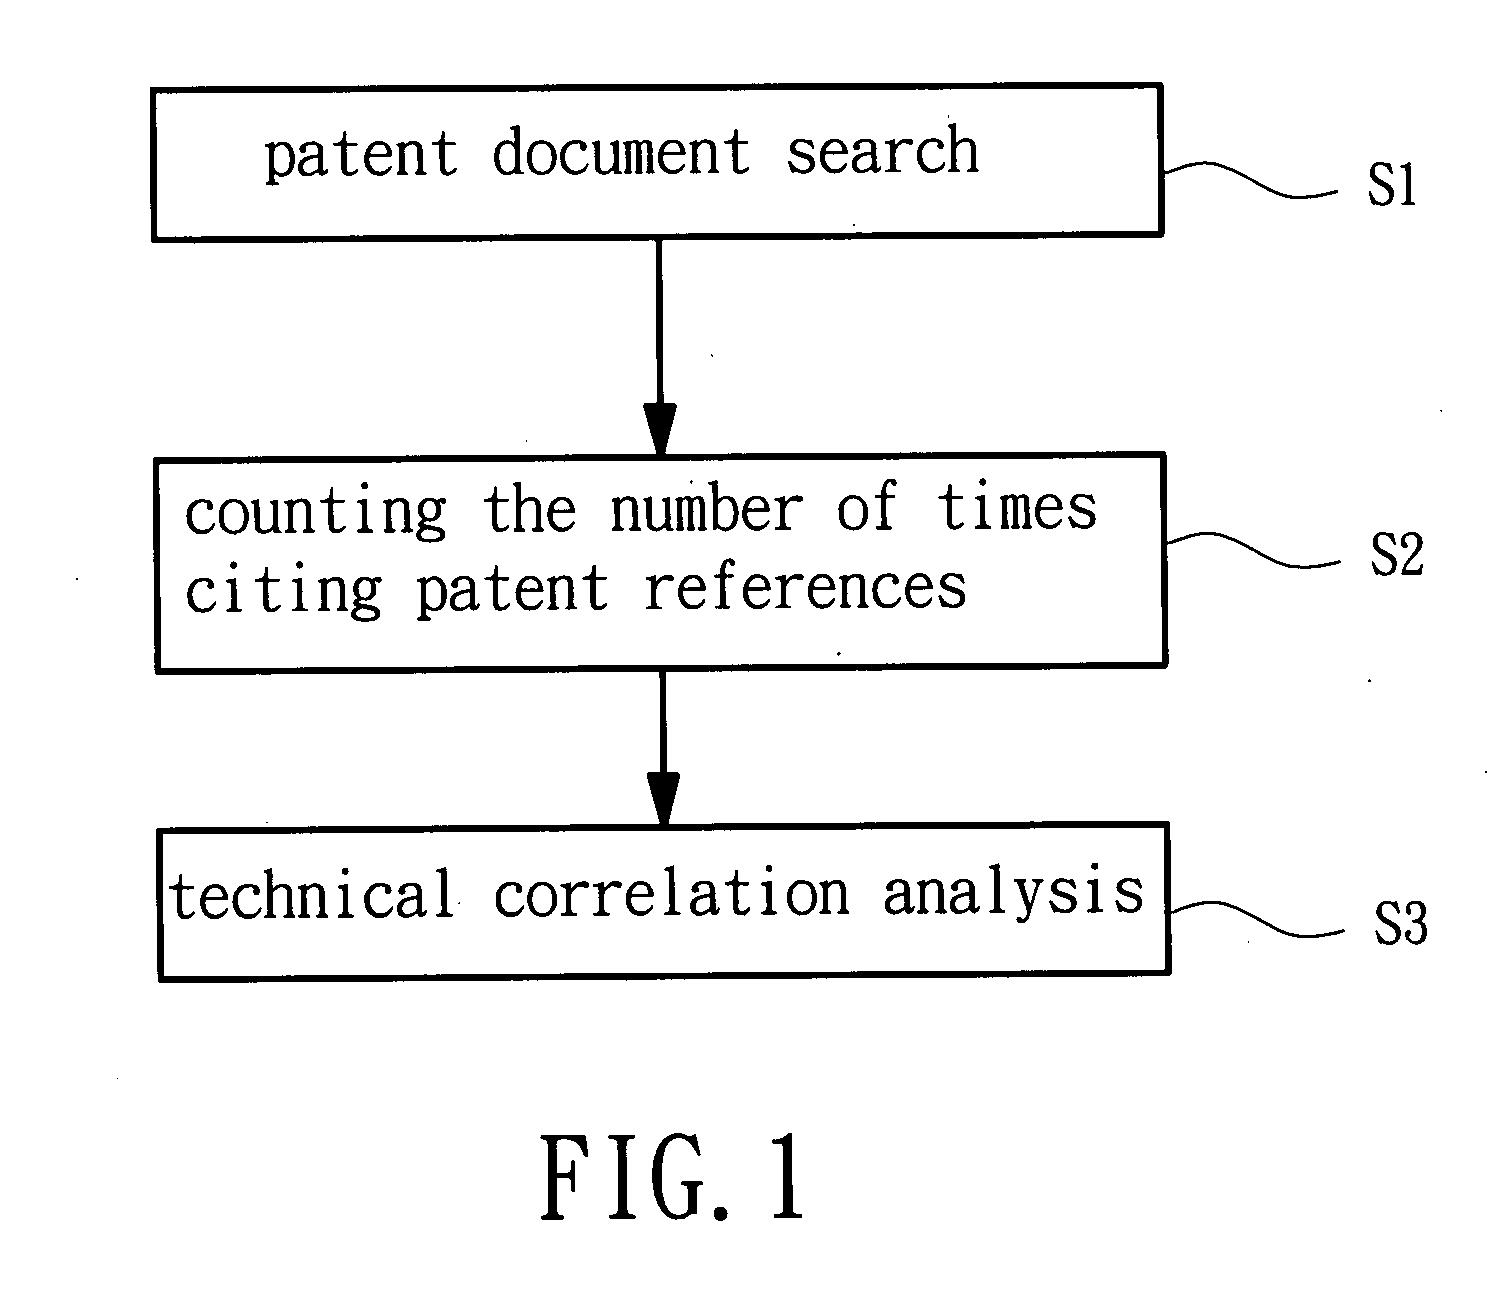 Technical correlation analysis method for evaluating patents